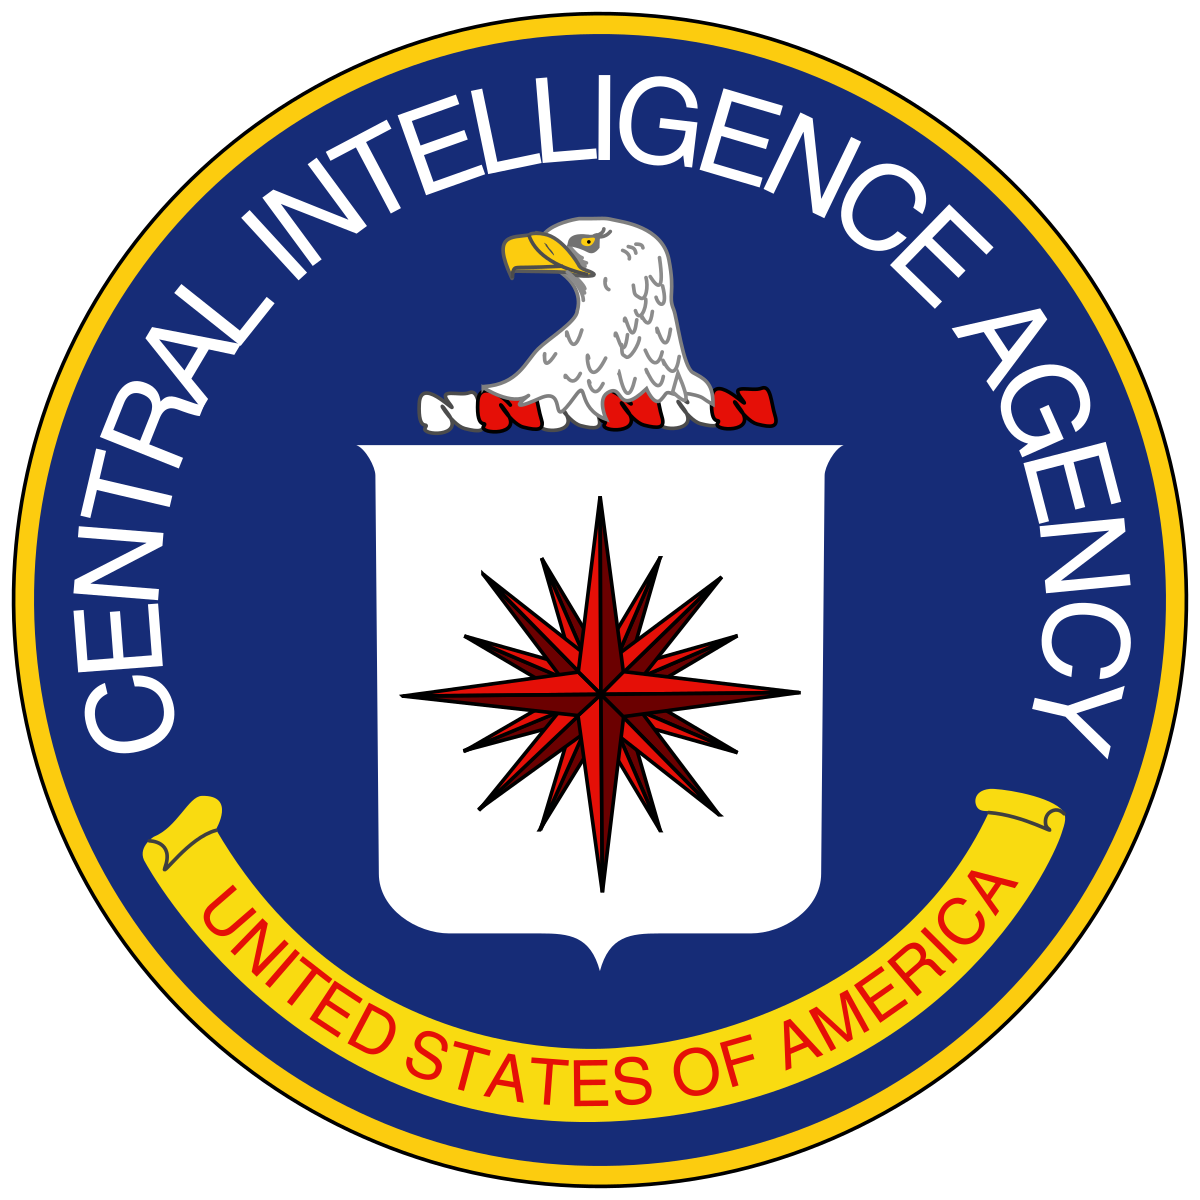 Central Intelligence Agency - Wikipedia